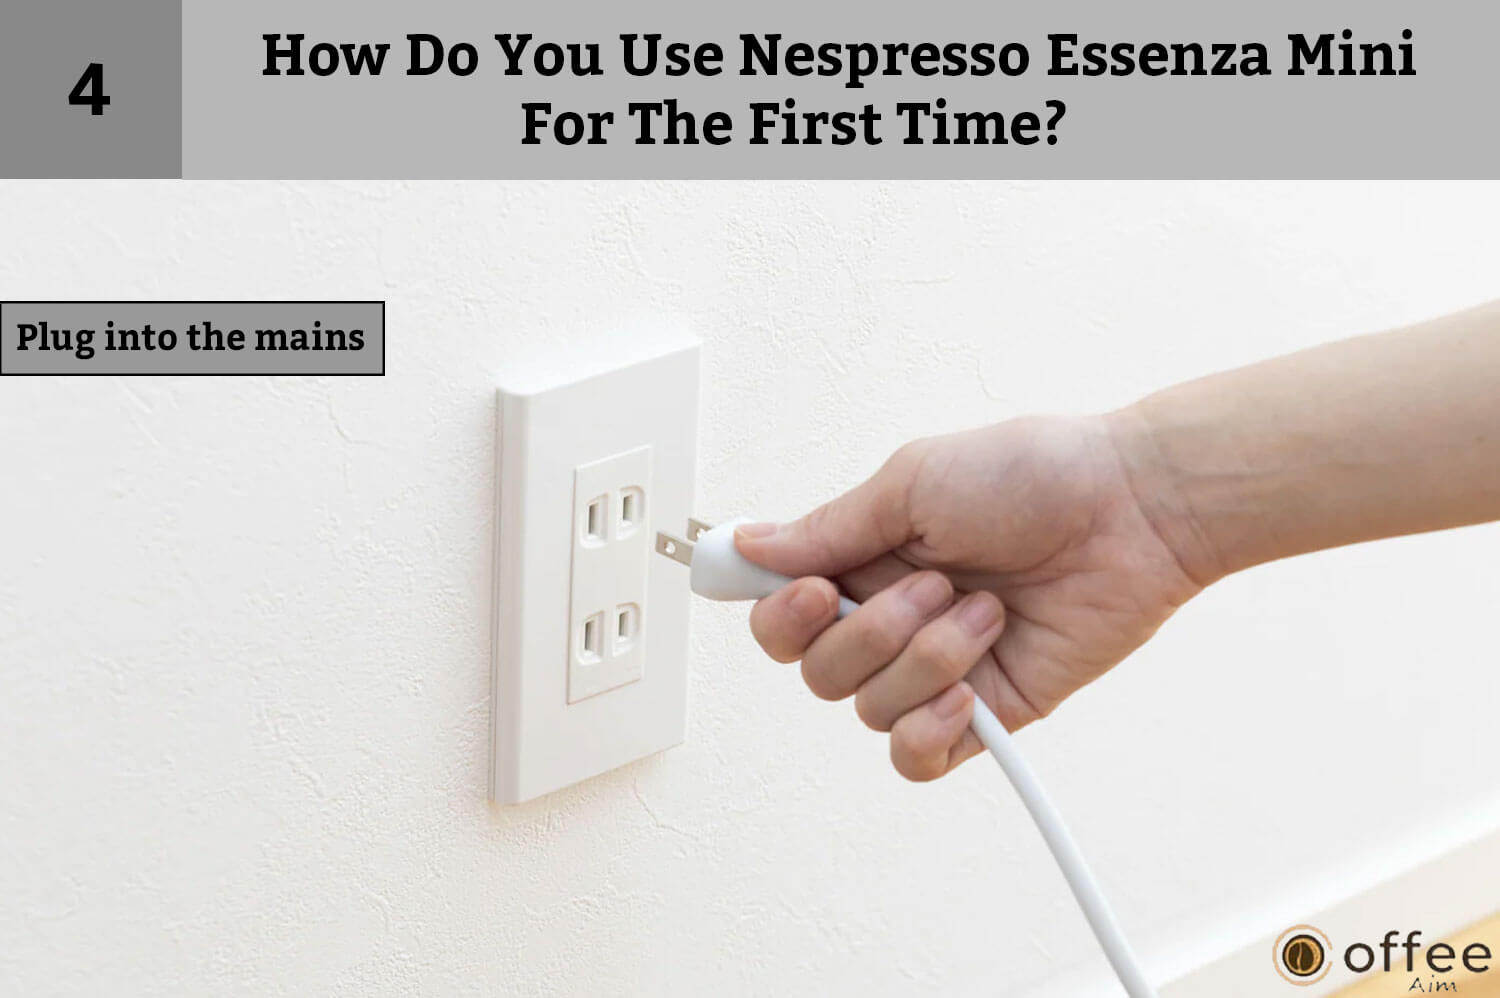 Fourth instruction of How Do You Use Nespresso Essenza Mini For The First Time? is Plug into the mains.